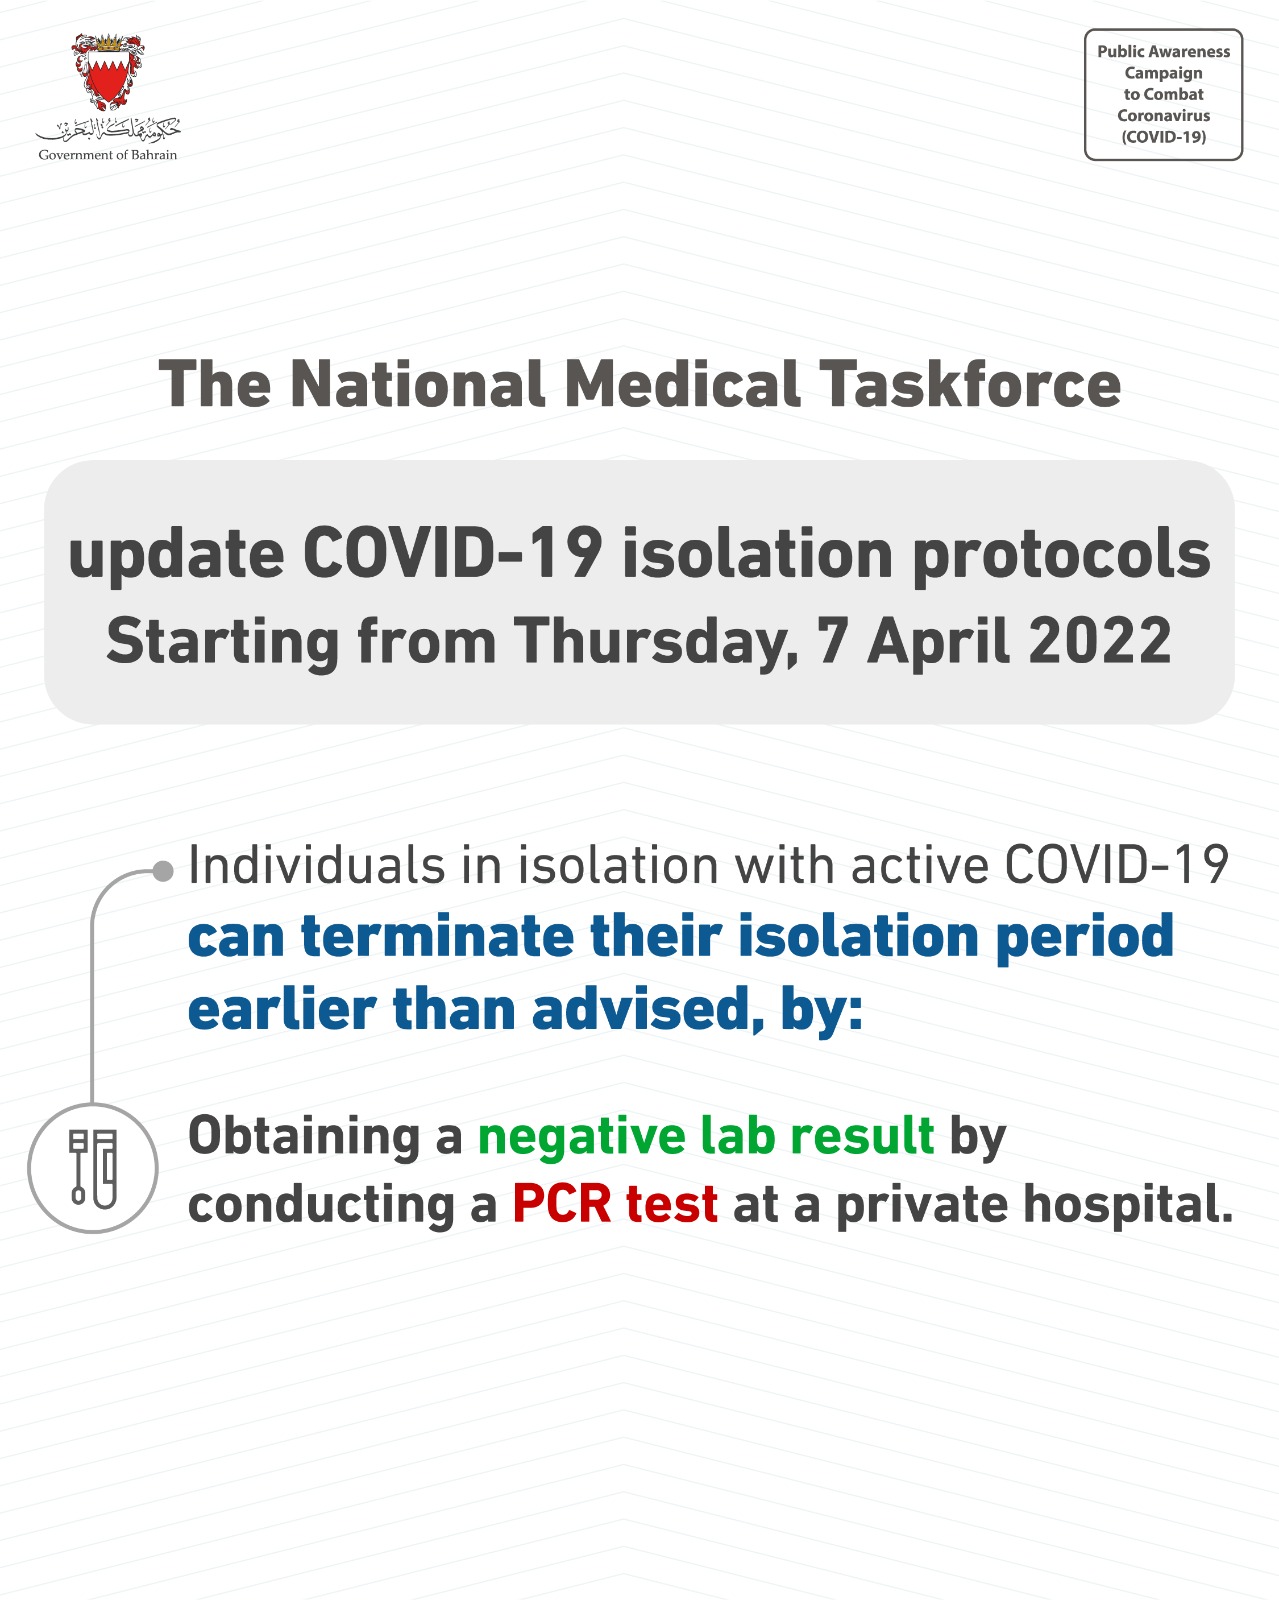 The National Medical Taskforce update COVID-19 isolation protocols: 05 April 2022